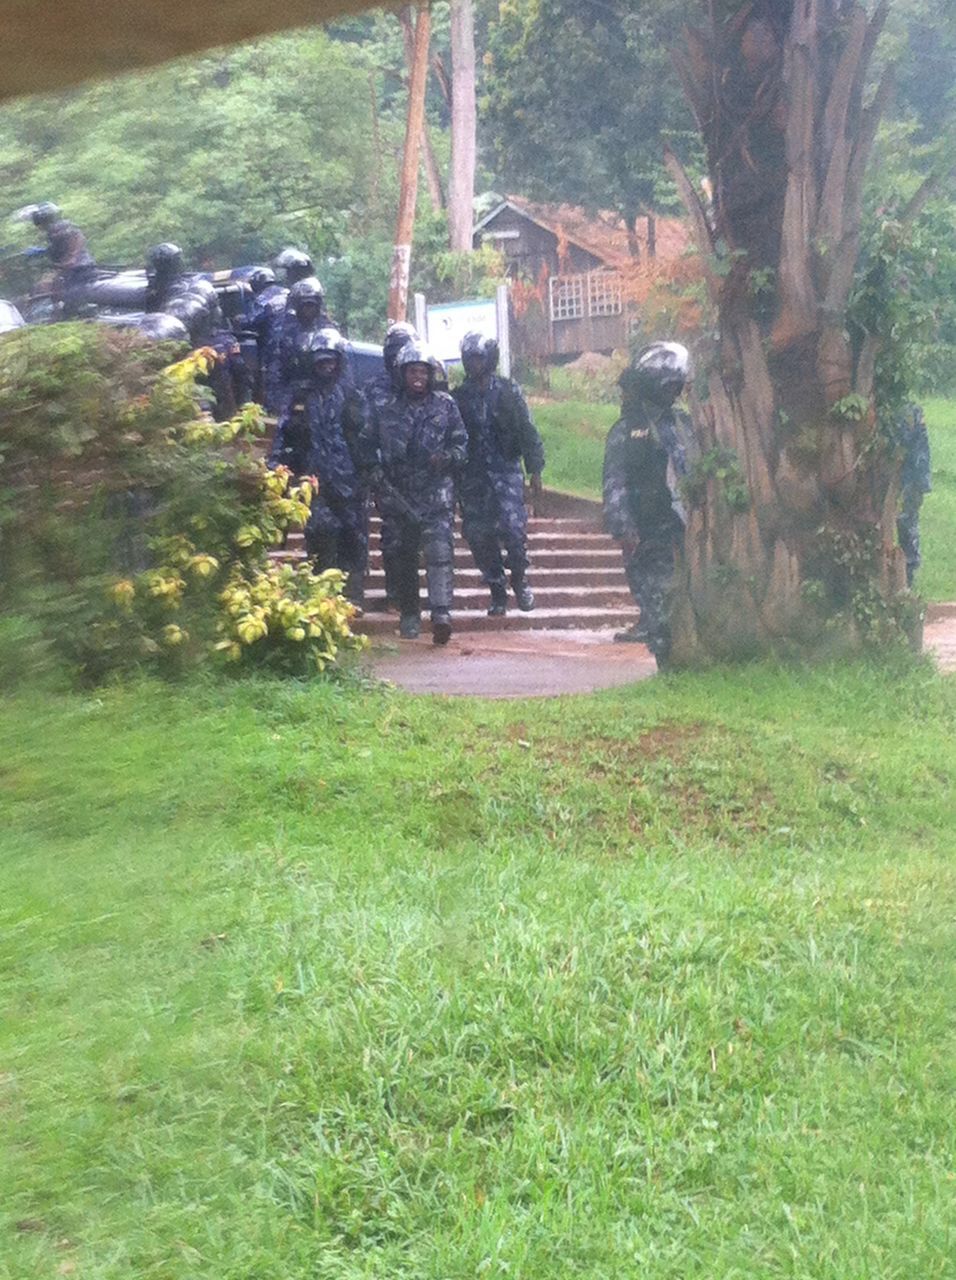 Police deployment at the campus 